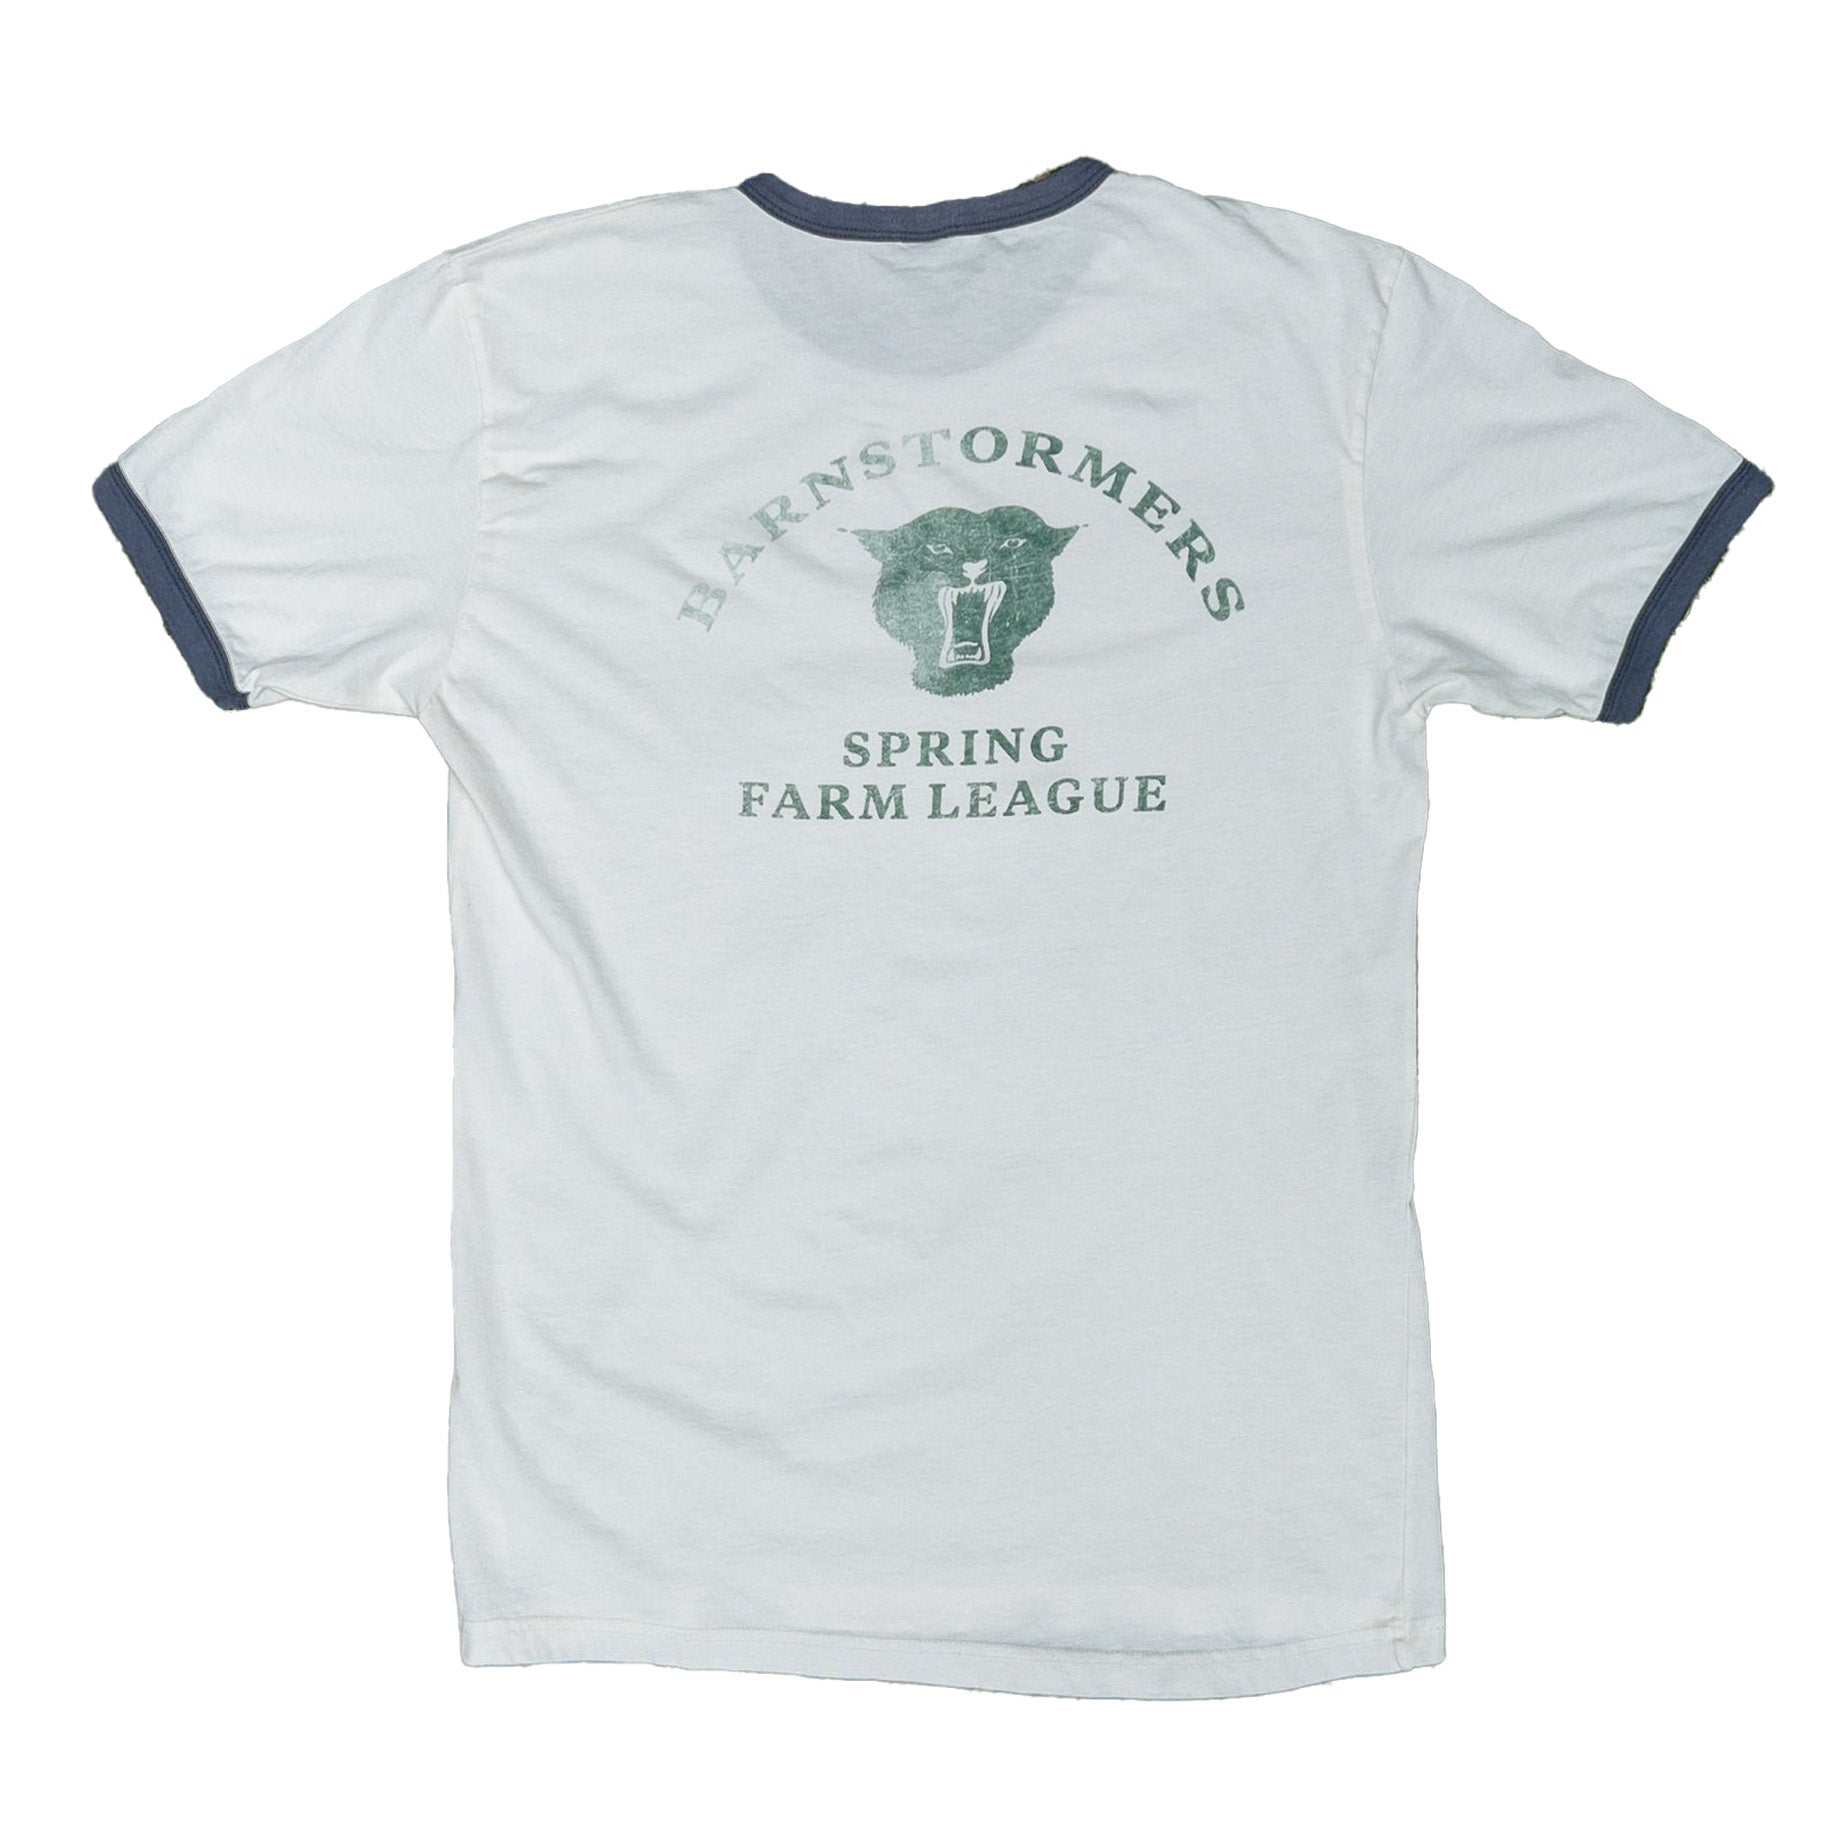 Wythe - Cotton Ringer Tee - BarnStormers Graphic